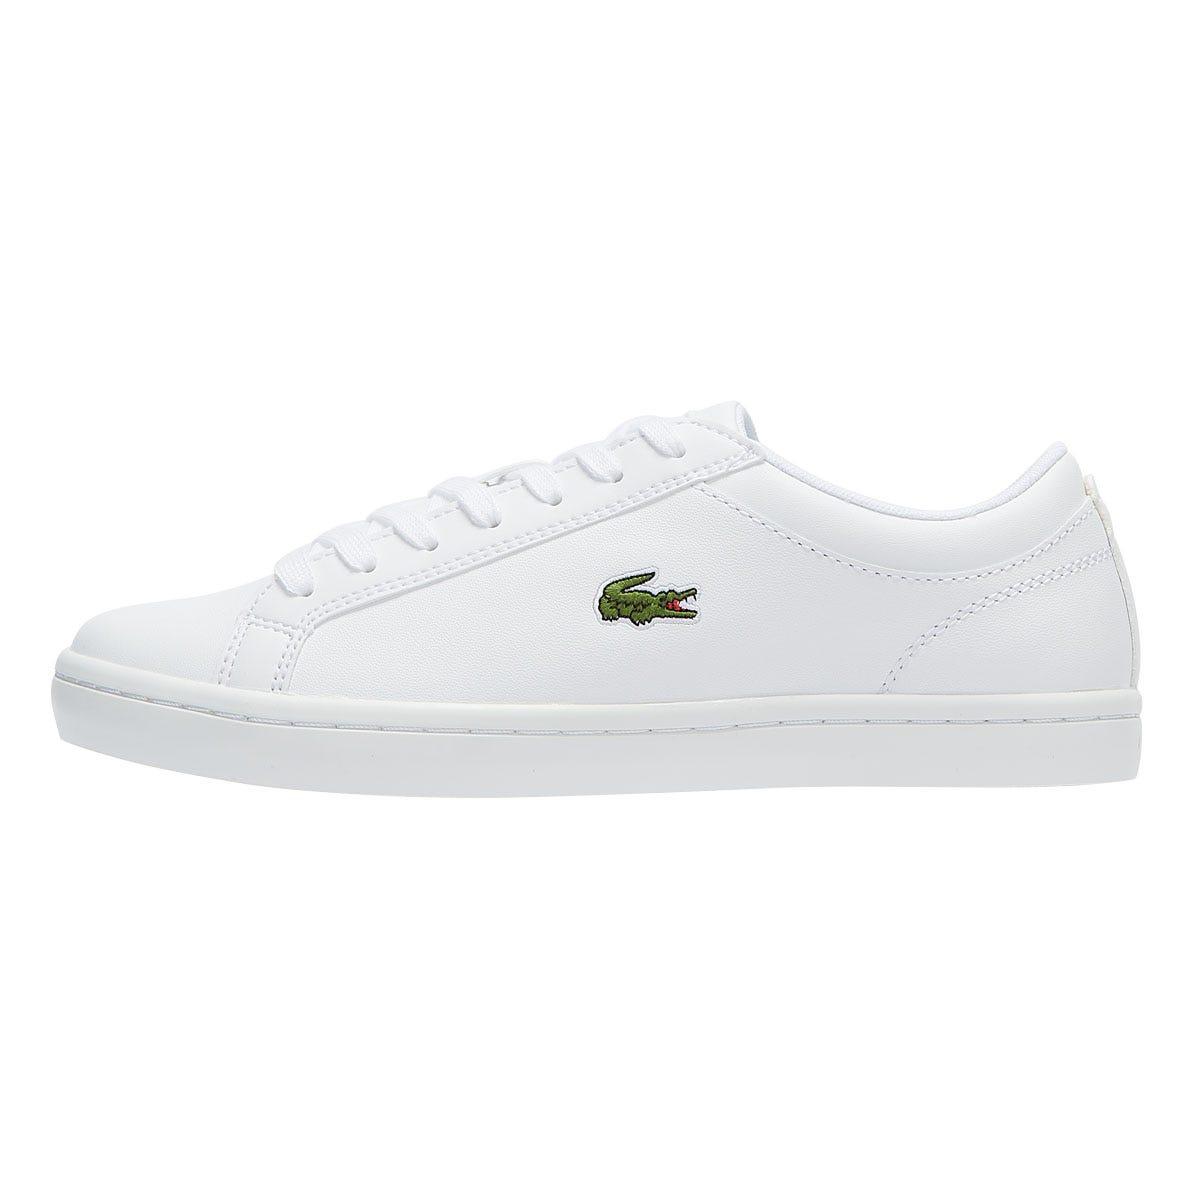 Fakultet åbenbaring Perth Blackborough Lacoste Straightset Bl1 Spw Trainers in White - Save 55% - Lyst